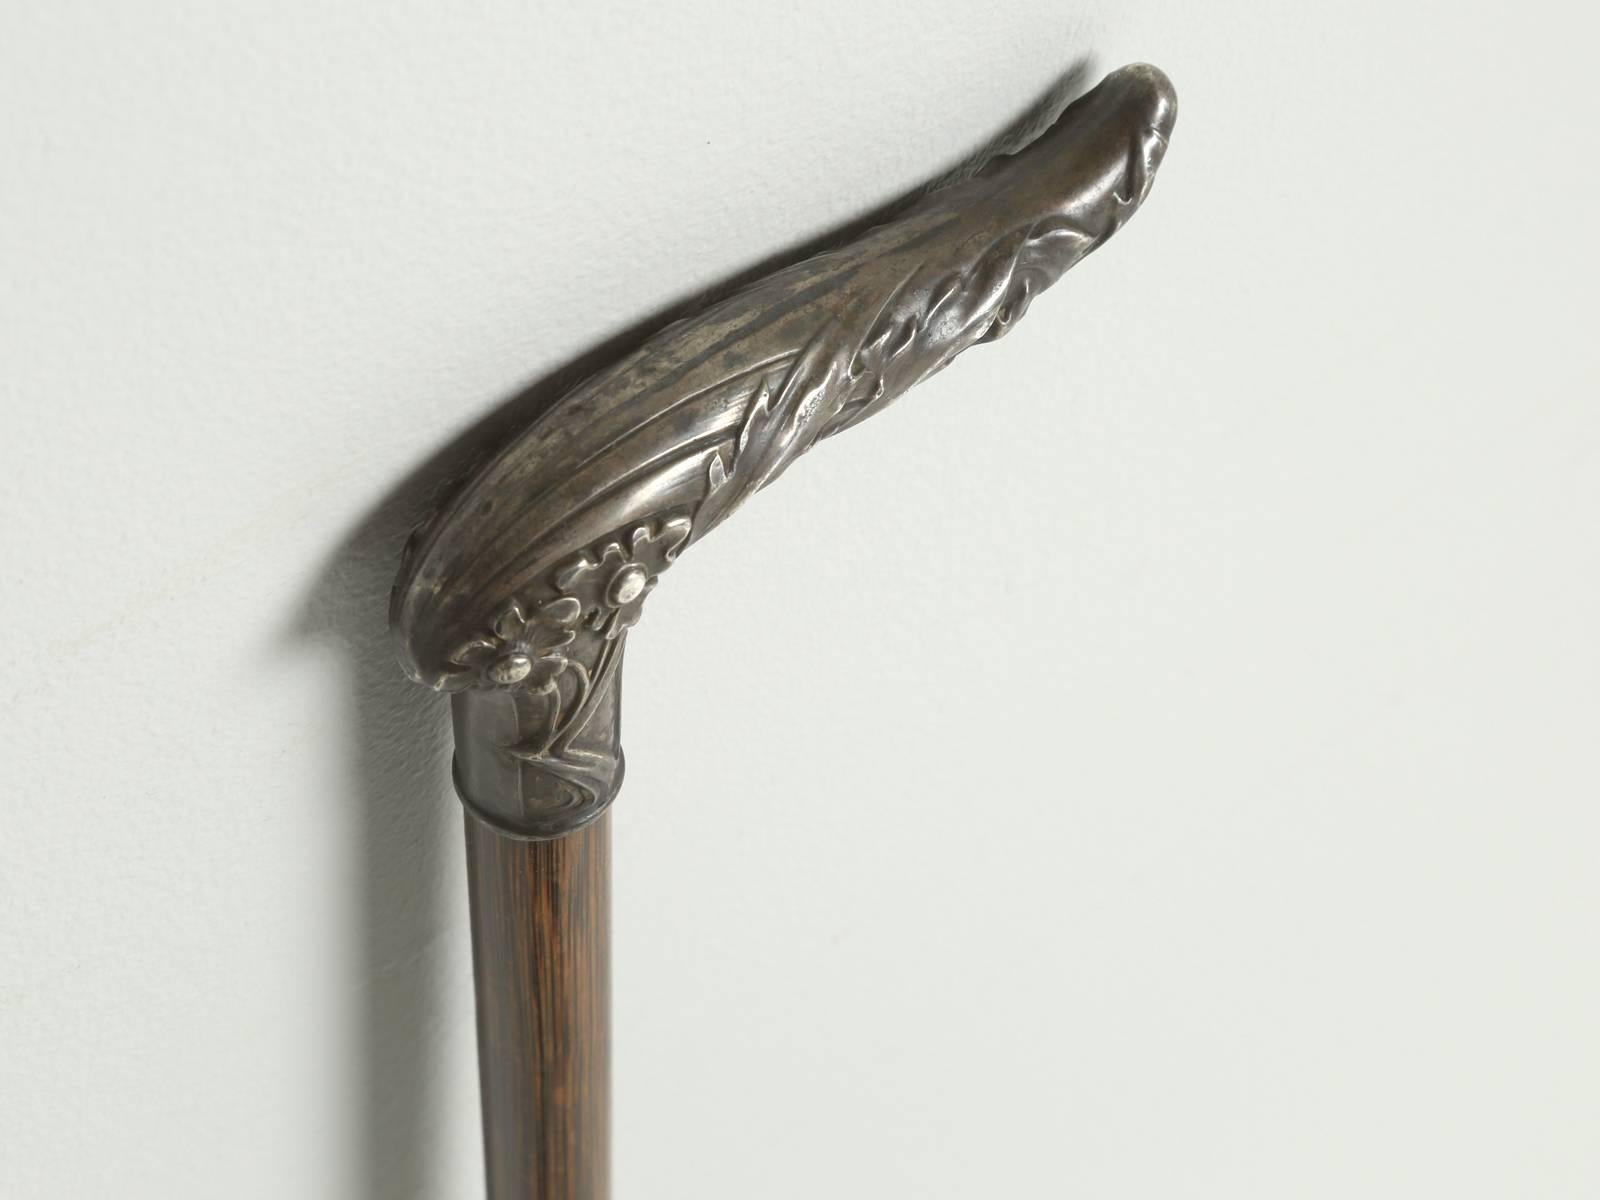 This particular walking stick appears to have been made for a woman, for it is lighter and more delicate in execution. There is even a hint of Art Nouveau in the flowers on the embossed silver handle. The shaft is done in a Fine striated finish